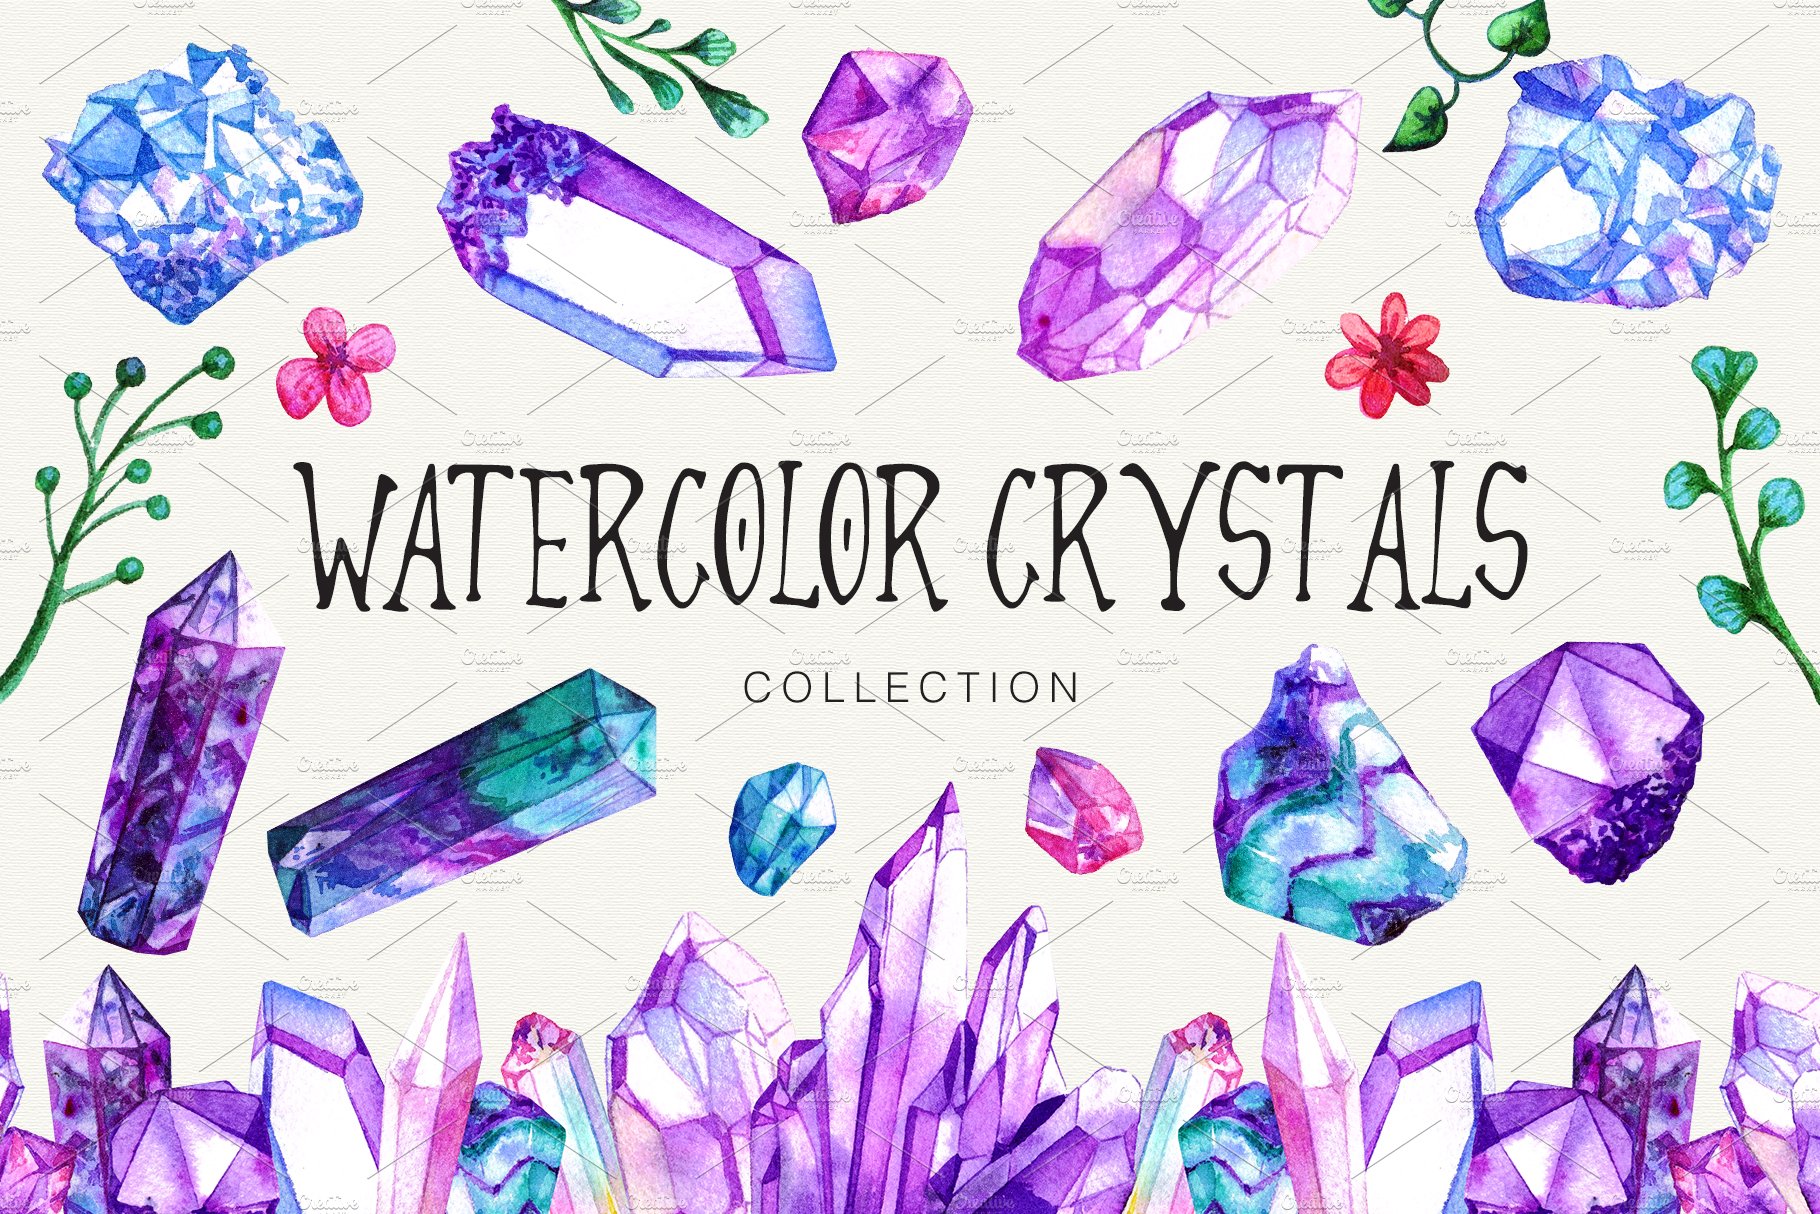 Watercolor Crystals Collection cover image.